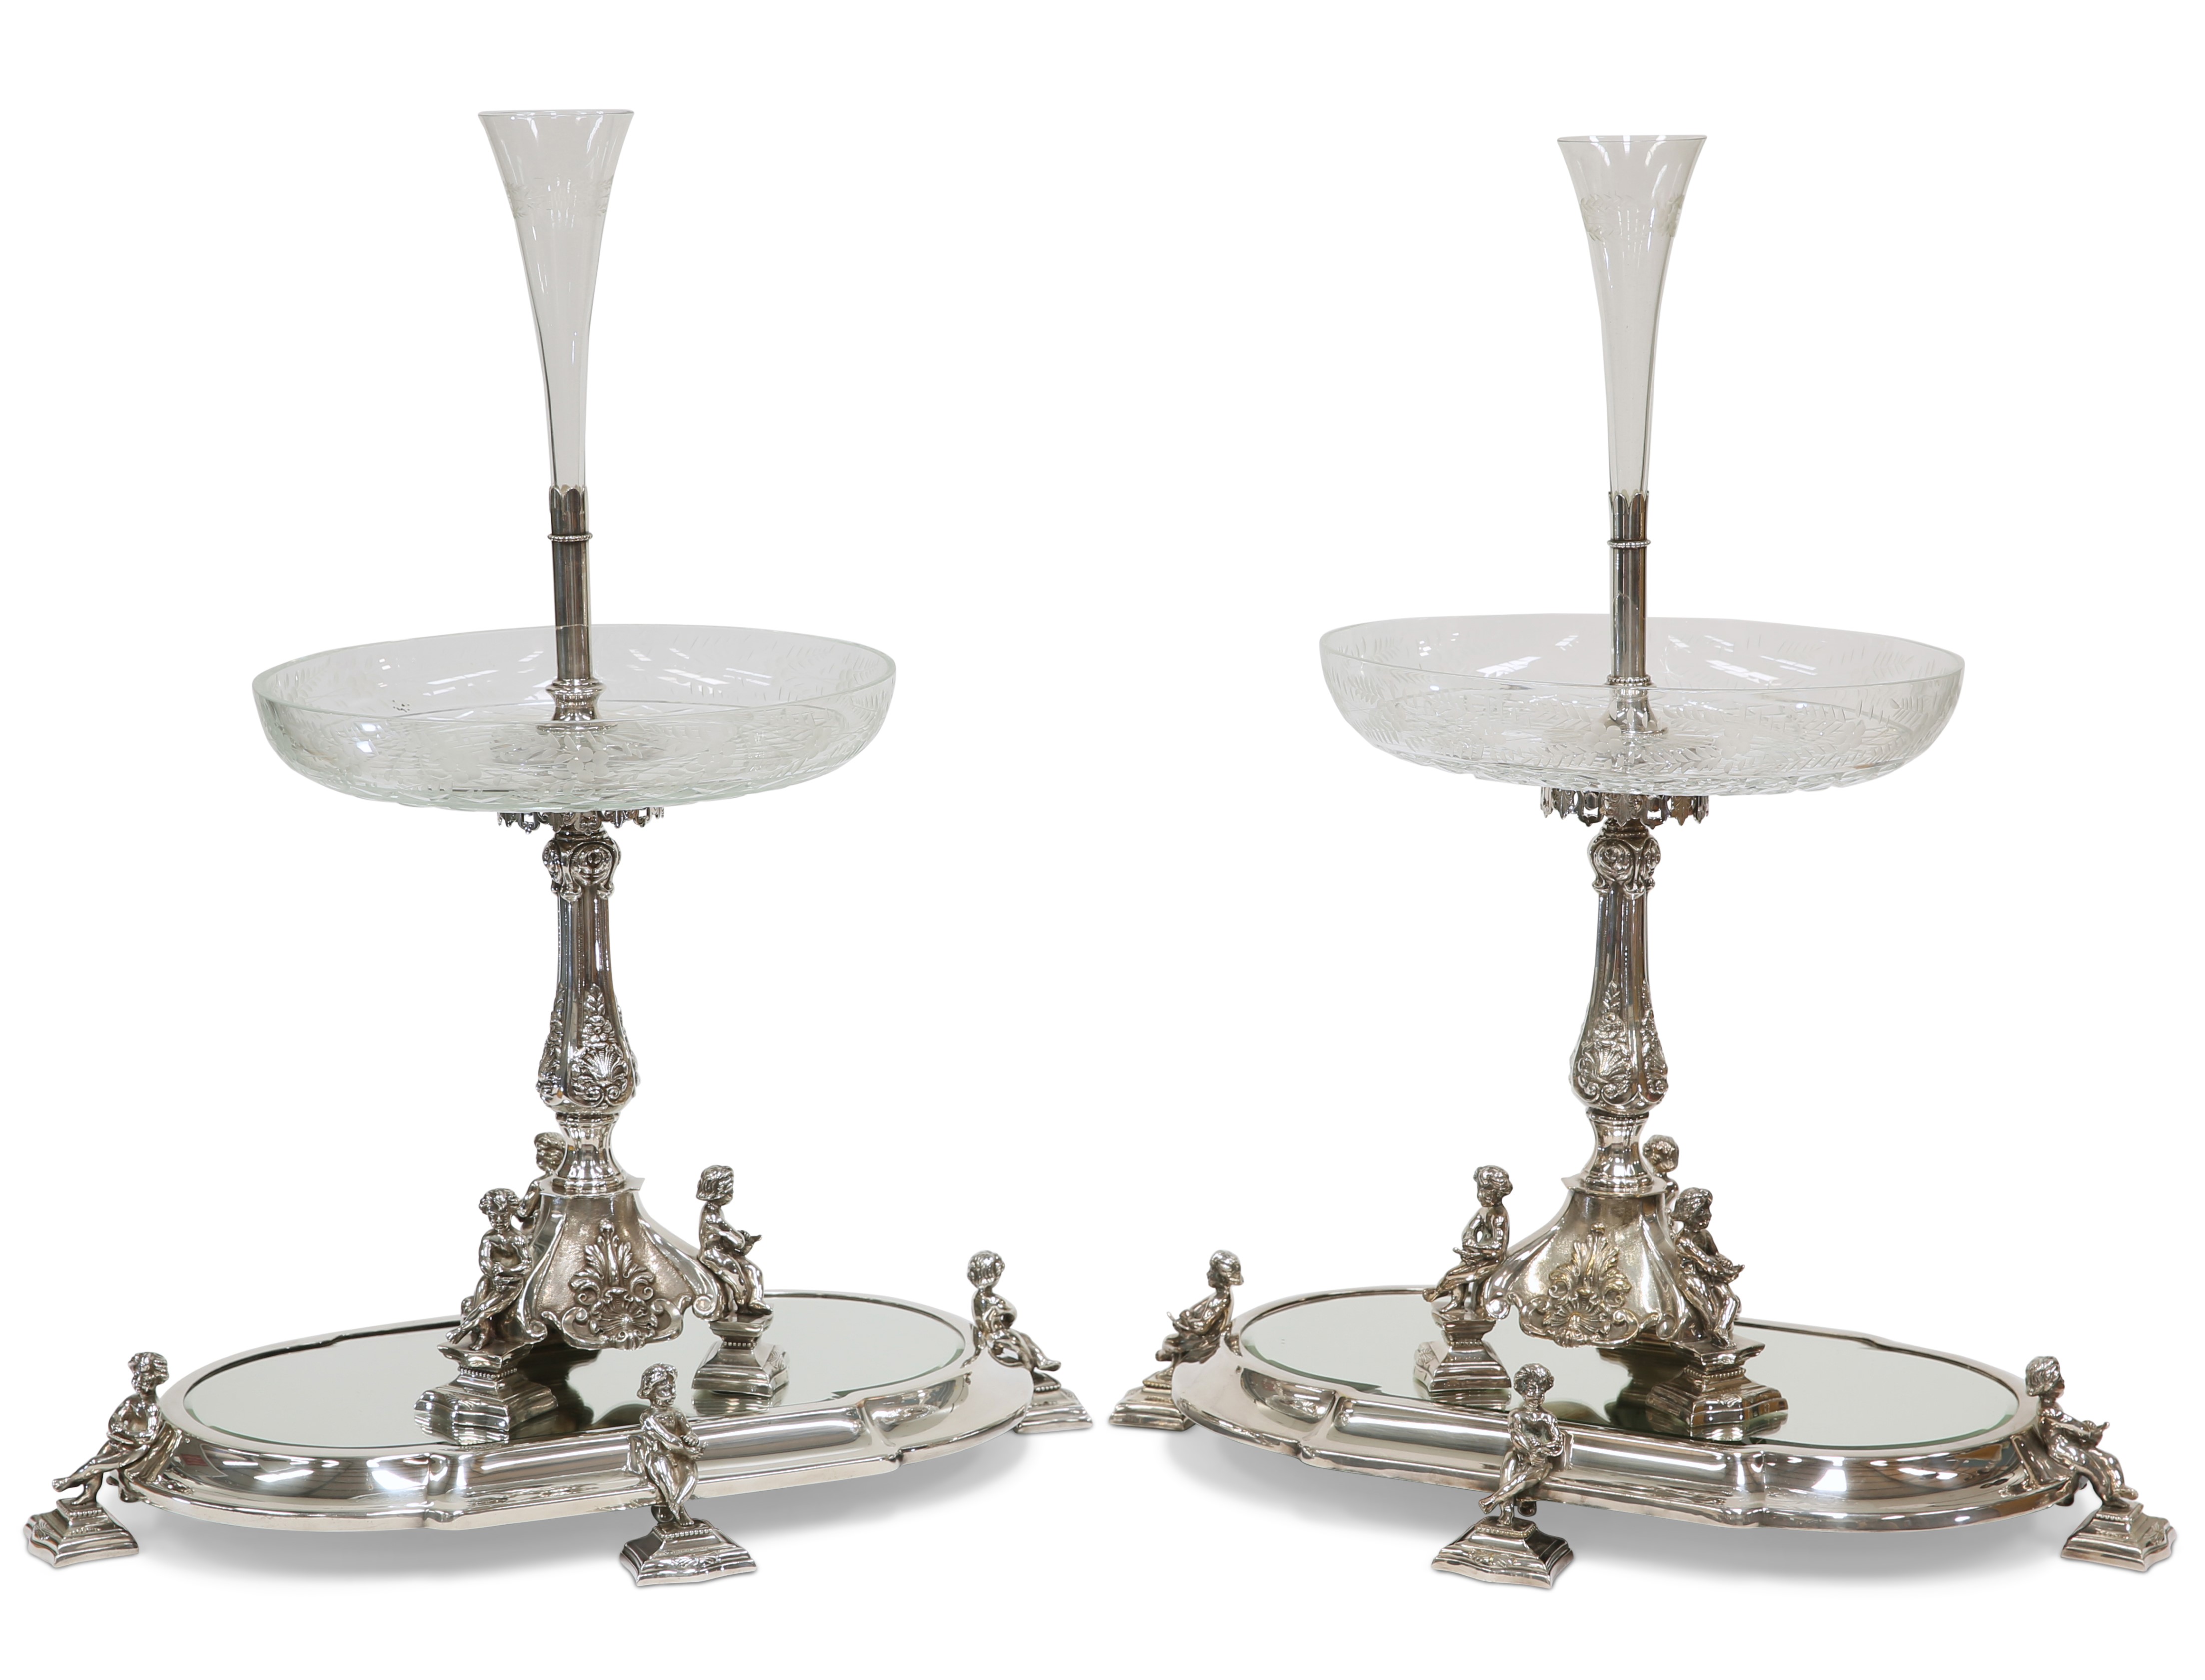 A HANDSOME PAIR OF 19TH CENTURY SILVER-PLATED CENTREPIECES ON MIRRORED STANDS